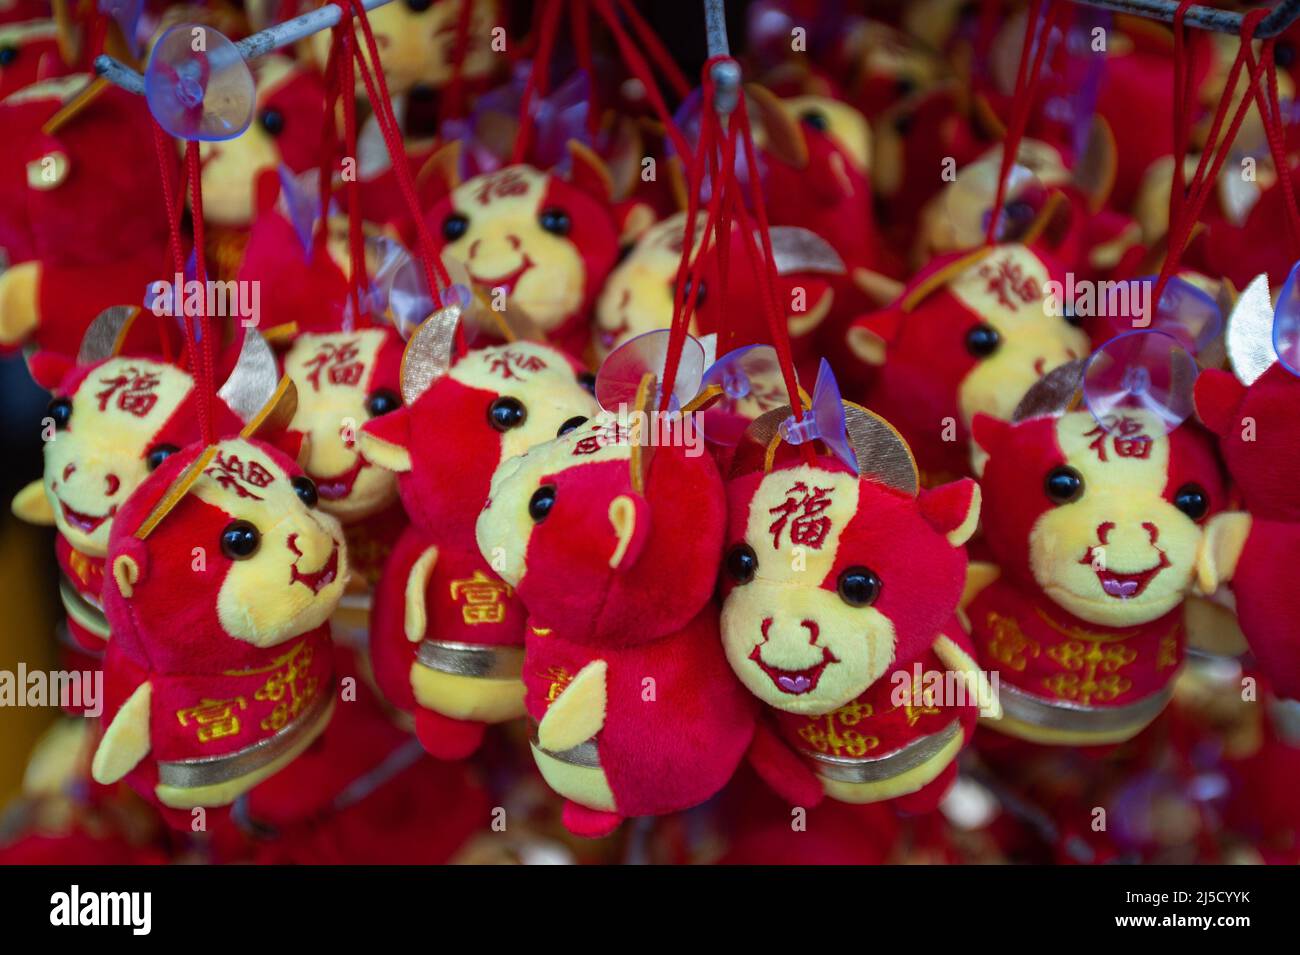 Jan. 29, 2021, Singapore, Republic of Singapore, Asia - A shop in the city's Chinatown district is selling decorative plush animals, which are in the Chinese zodiac sign of the ox, for the upcoming Chinese New Year. Due to the ongoing Corona pandemic, official celebrations will be curtailed this year. [automated translation] Stock Photo